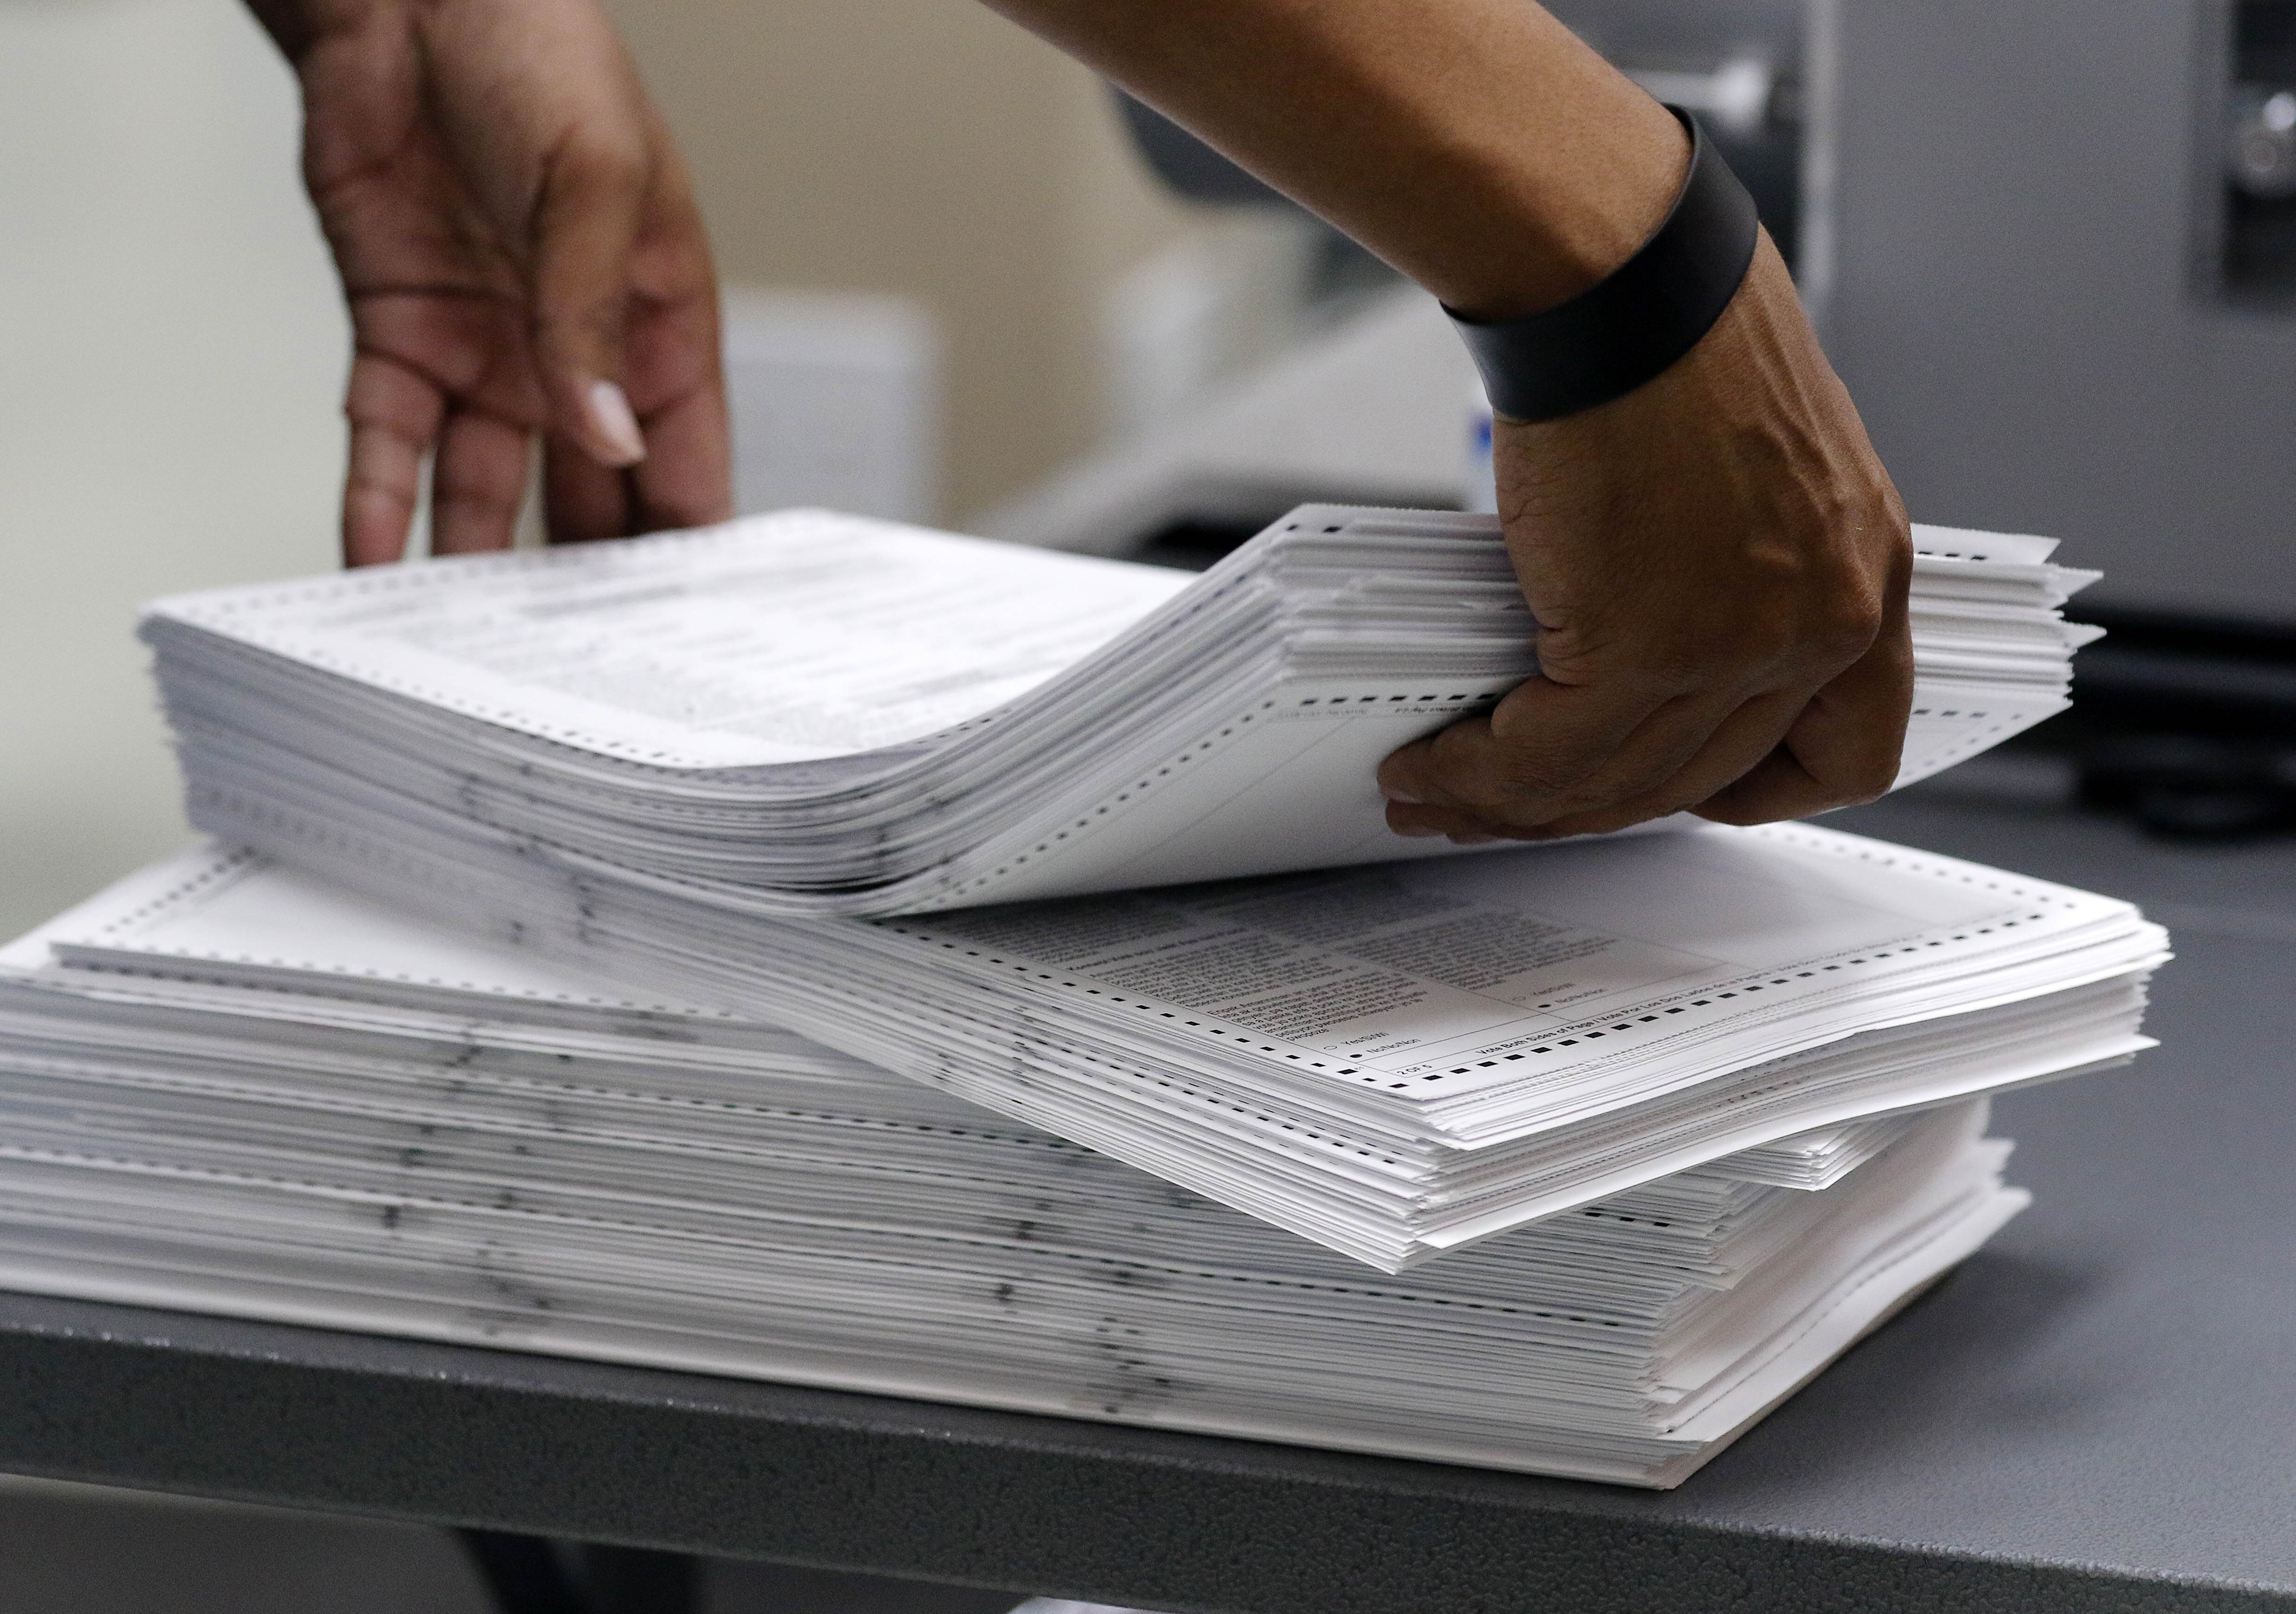 Elections staff load ballots into machine as recounting is underway at the Broward County Supervisor of Elections Office. Photo: AFP